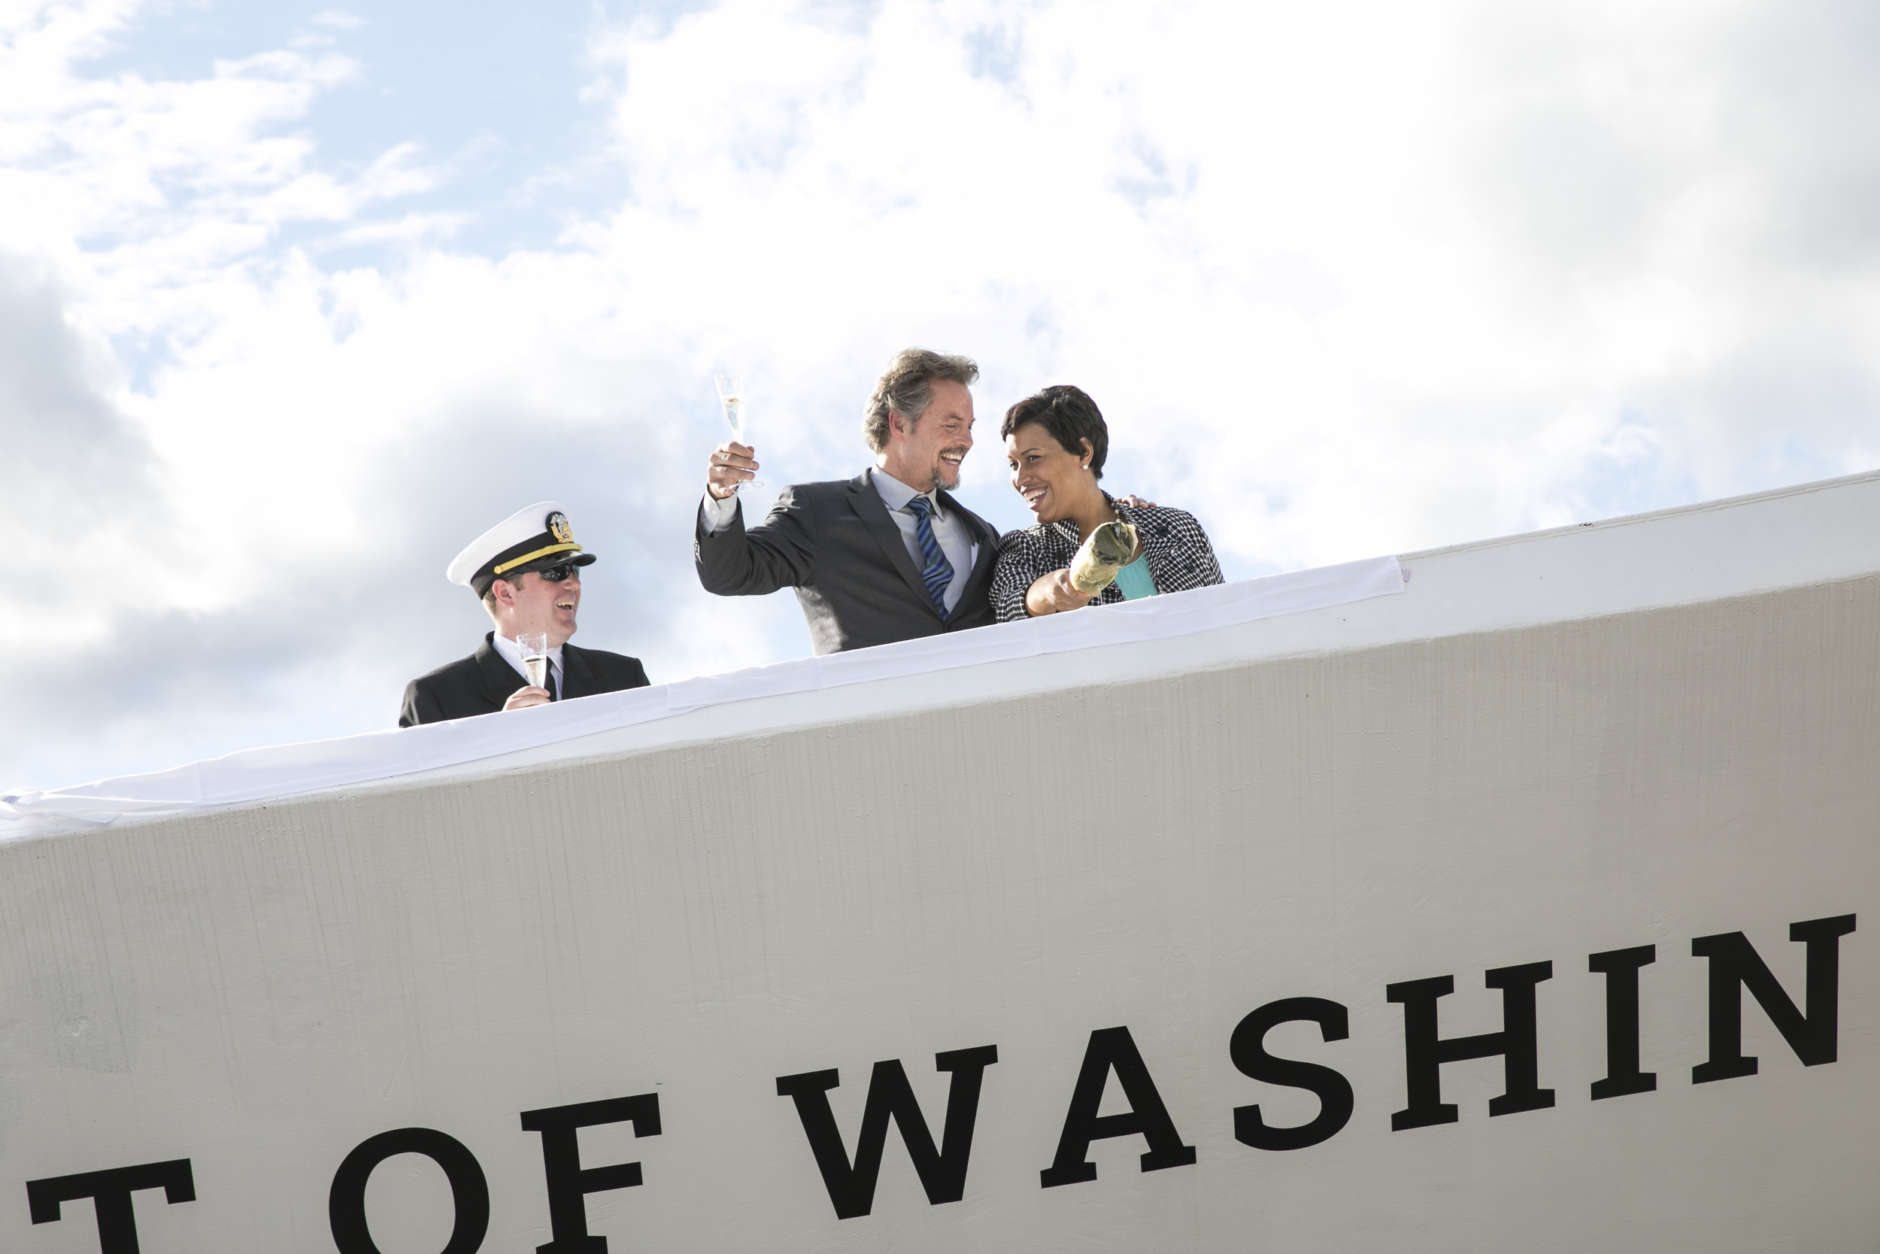 Captain Nate Handy and Entertainment Cruises CEO Kenneth Svendsen join DC Mayor Muriel Bowser in christening the new Spirit of Washington Yacht at The Wharf's Pier 4 Tuesday afternoon. (Jason Dixson Photography)